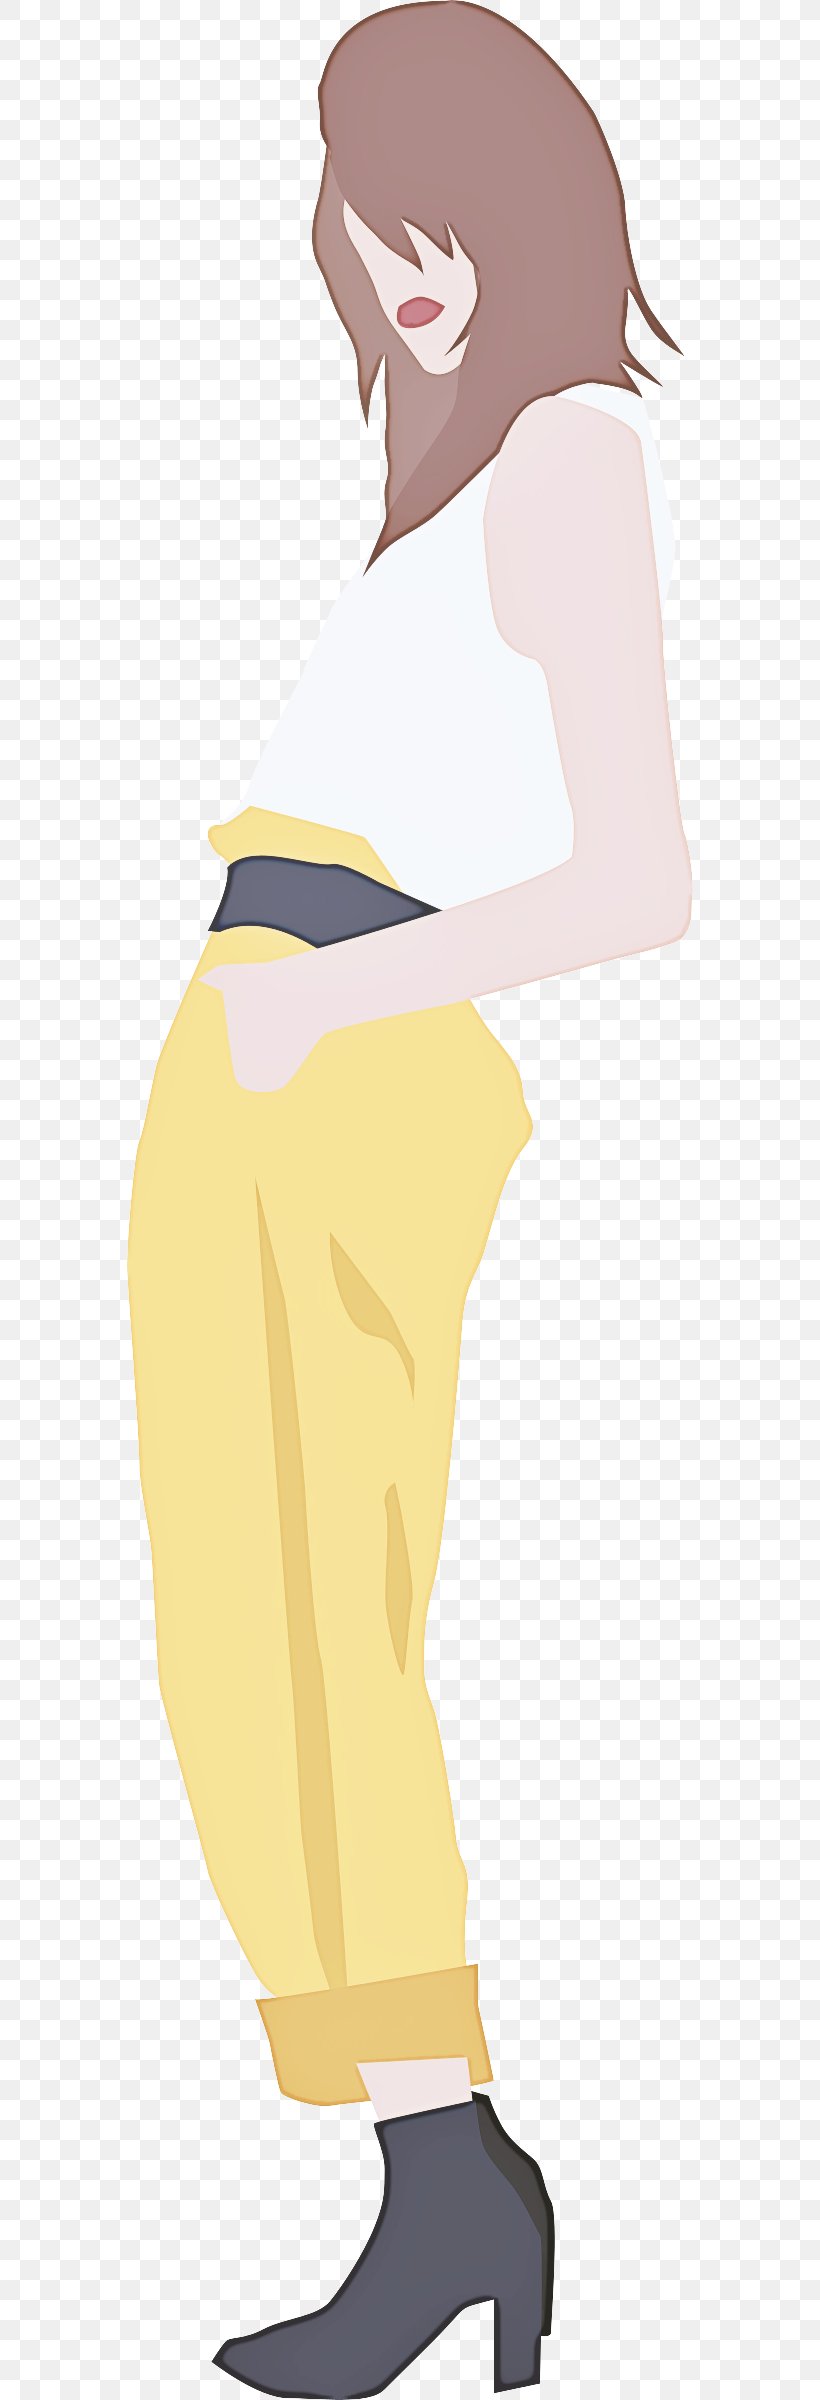 Clothing Yellow Dress Shoulder Pencil Skirt, PNG, 566x2400px, Clothing, Dress, Joint, Pencil Skirt, Shoulder Download Free